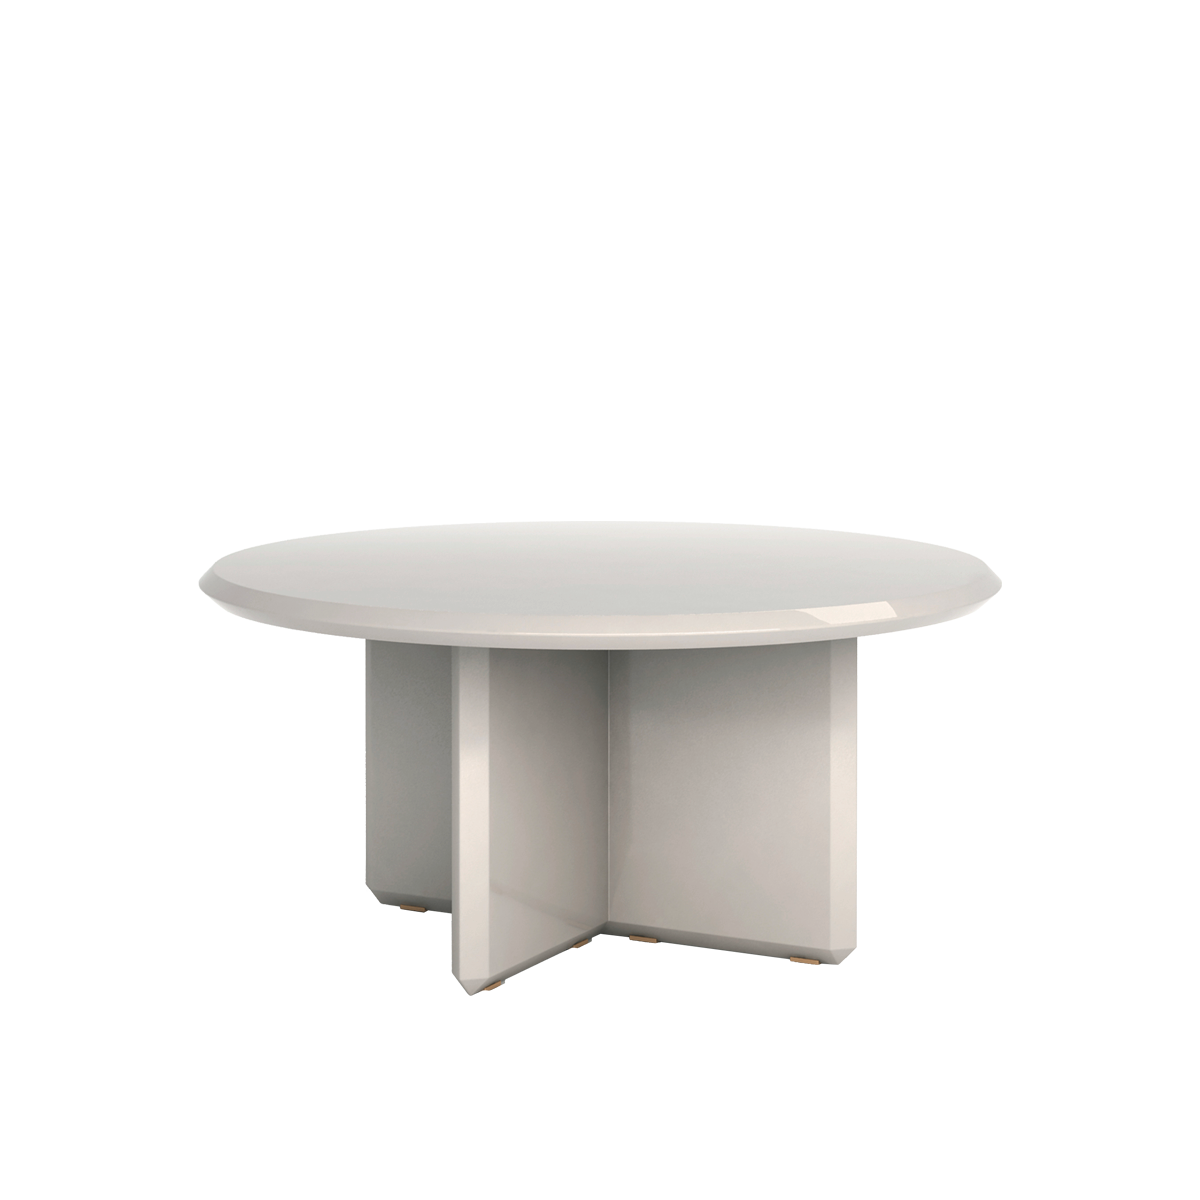 Vane Table - Round  from ¥29,000